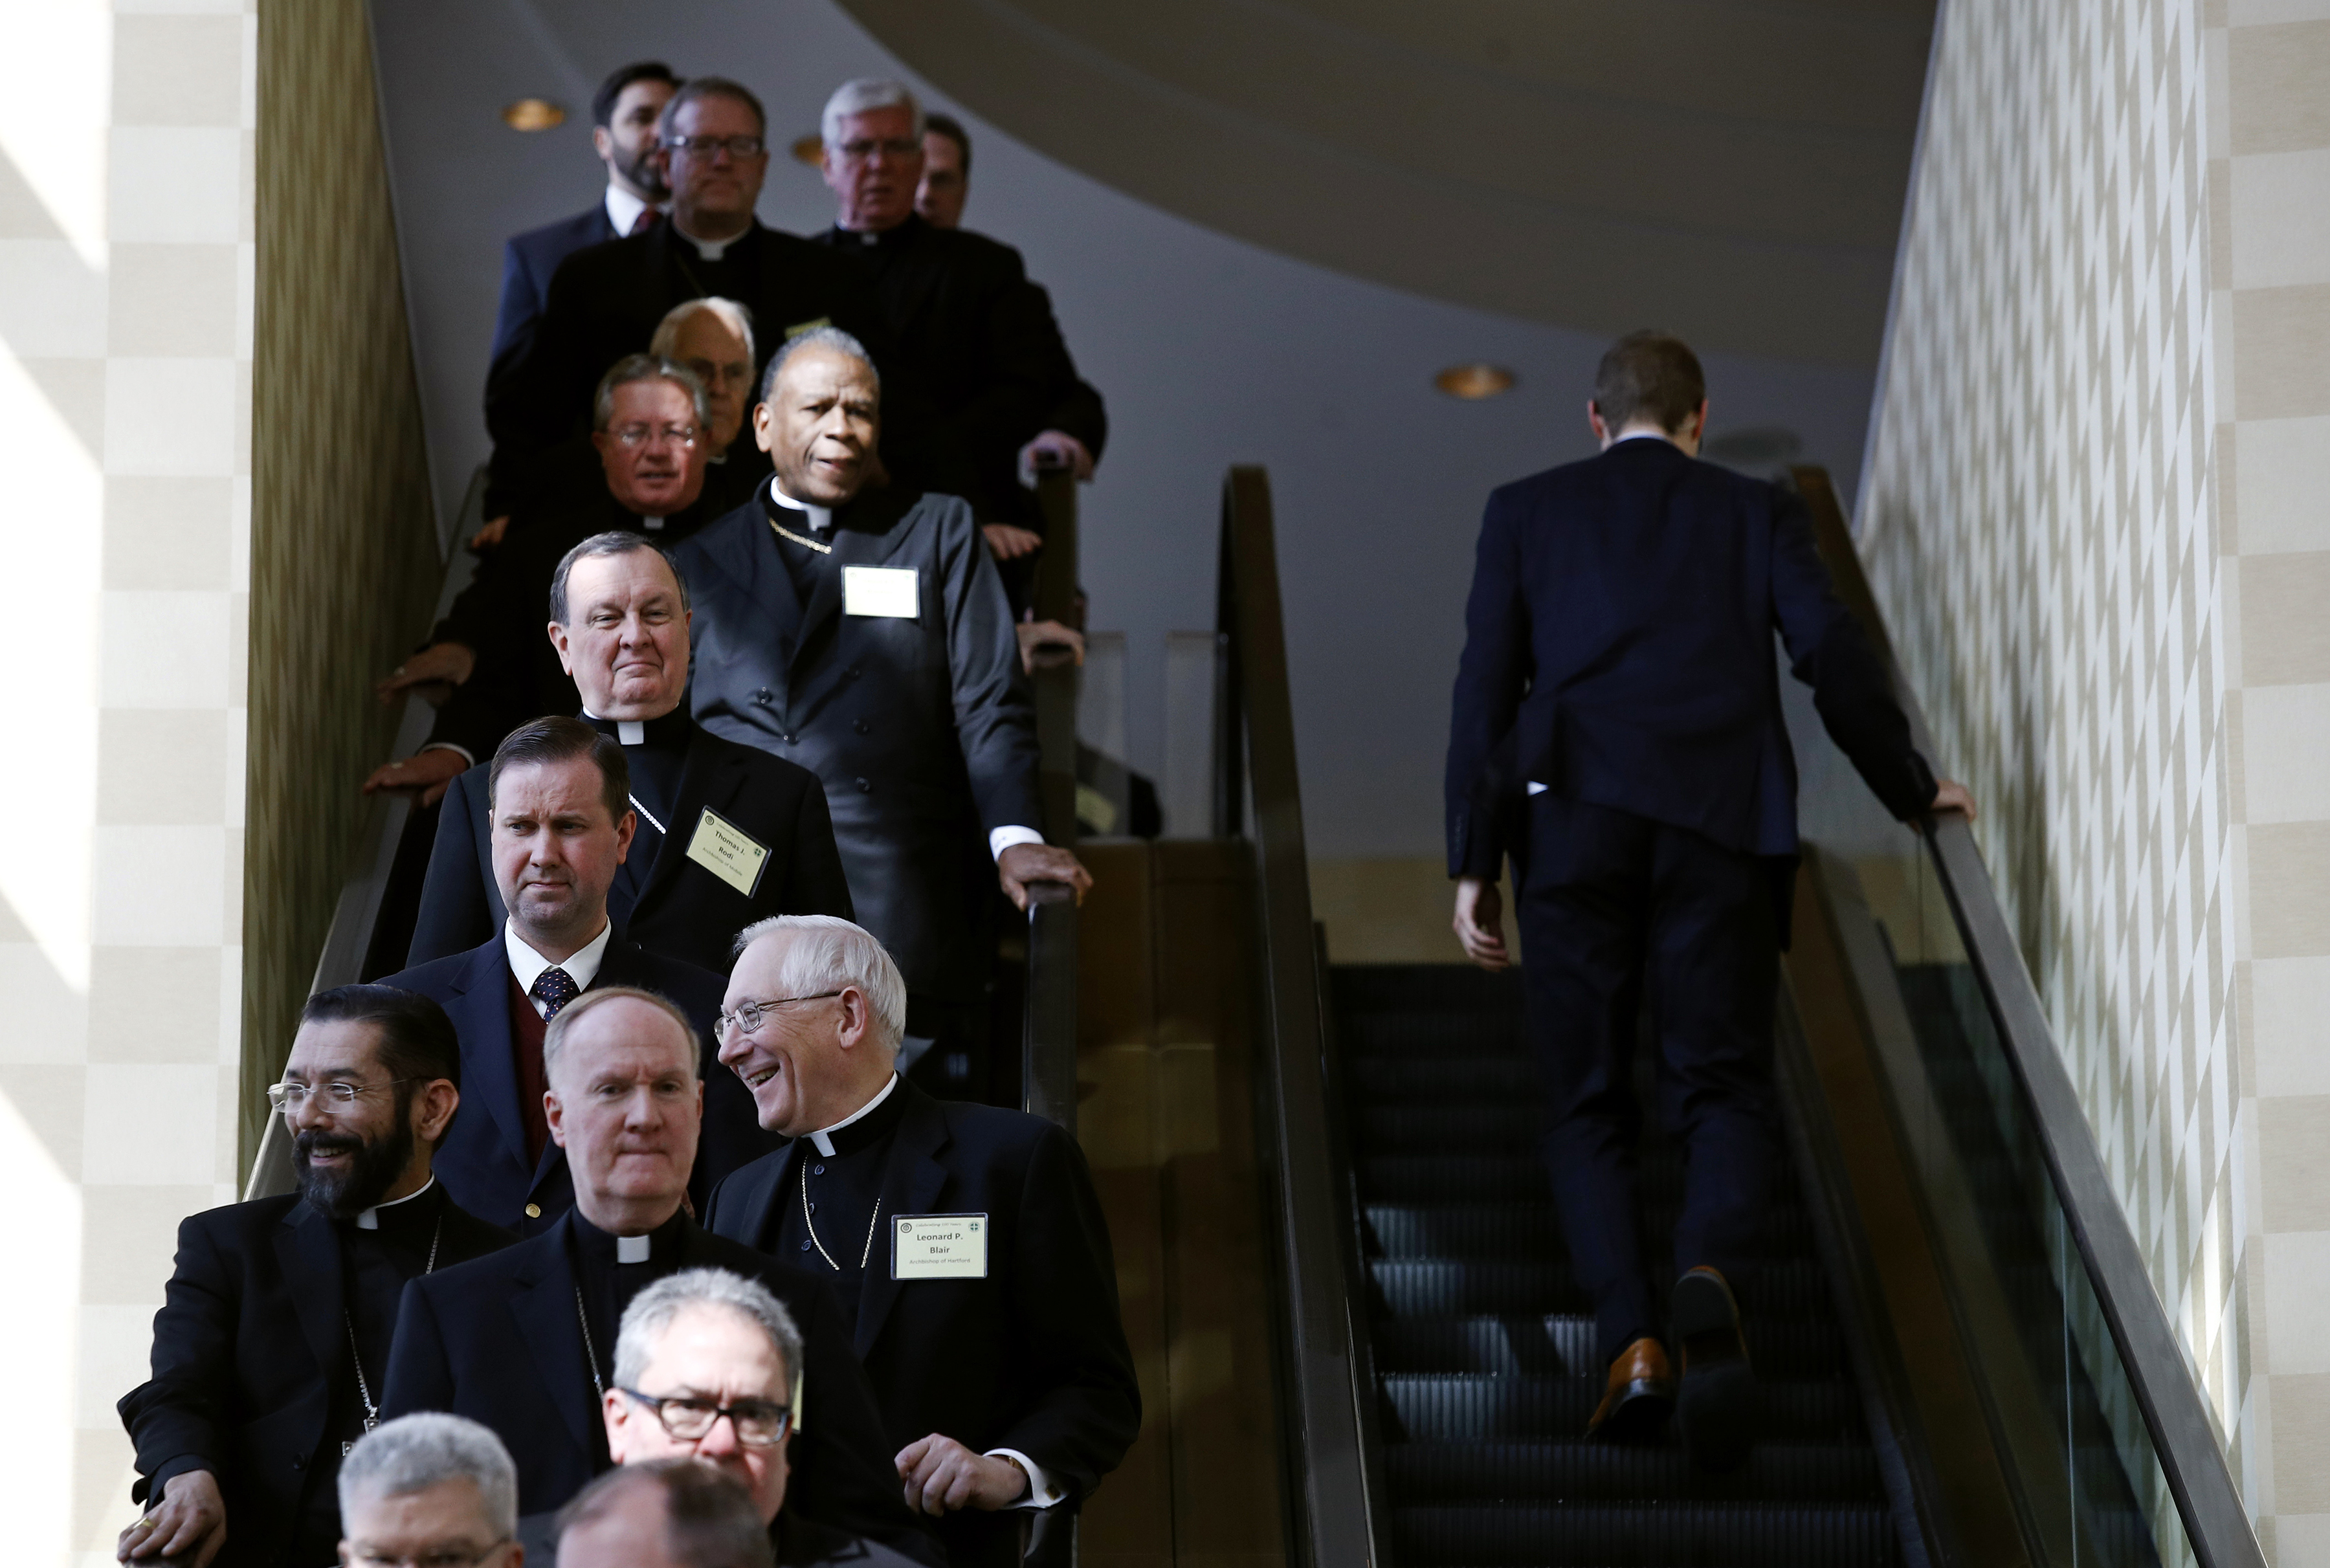 Members of the the United States Conference of Catholic Bishops ride an escalator during a break in sessions at the USCCB's annual fall meeting in Baltimore, on Nov. 13, 2017. (AP Photo/Patrick Semansky)